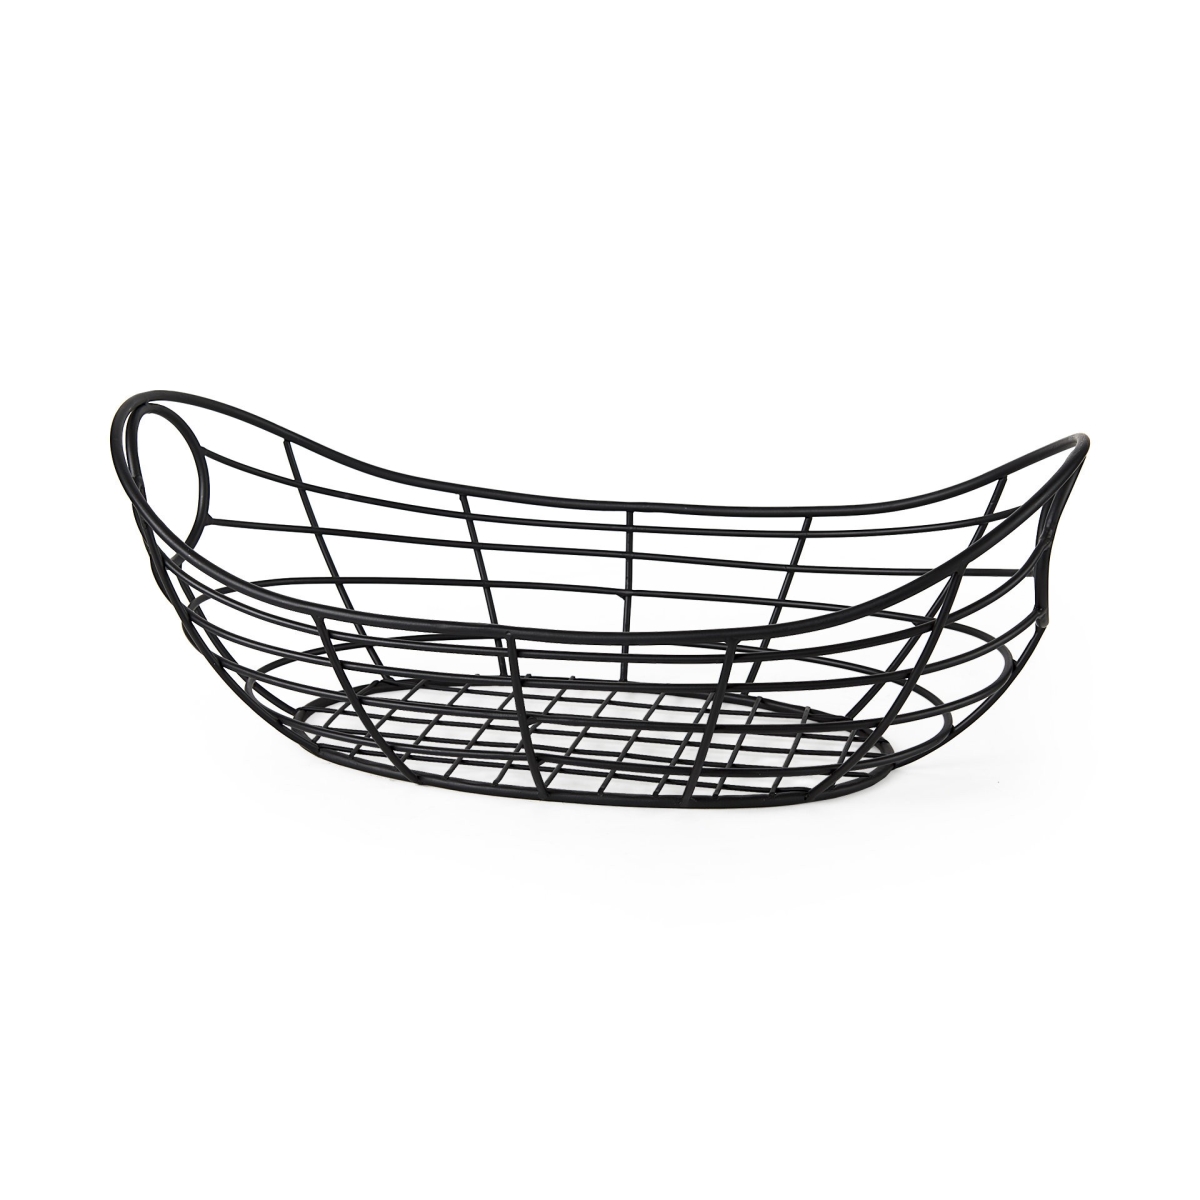 Picture of HomeRoots 392150 7.87 x 12 x 22.04 in. Black Metal Boat Shaped Basket